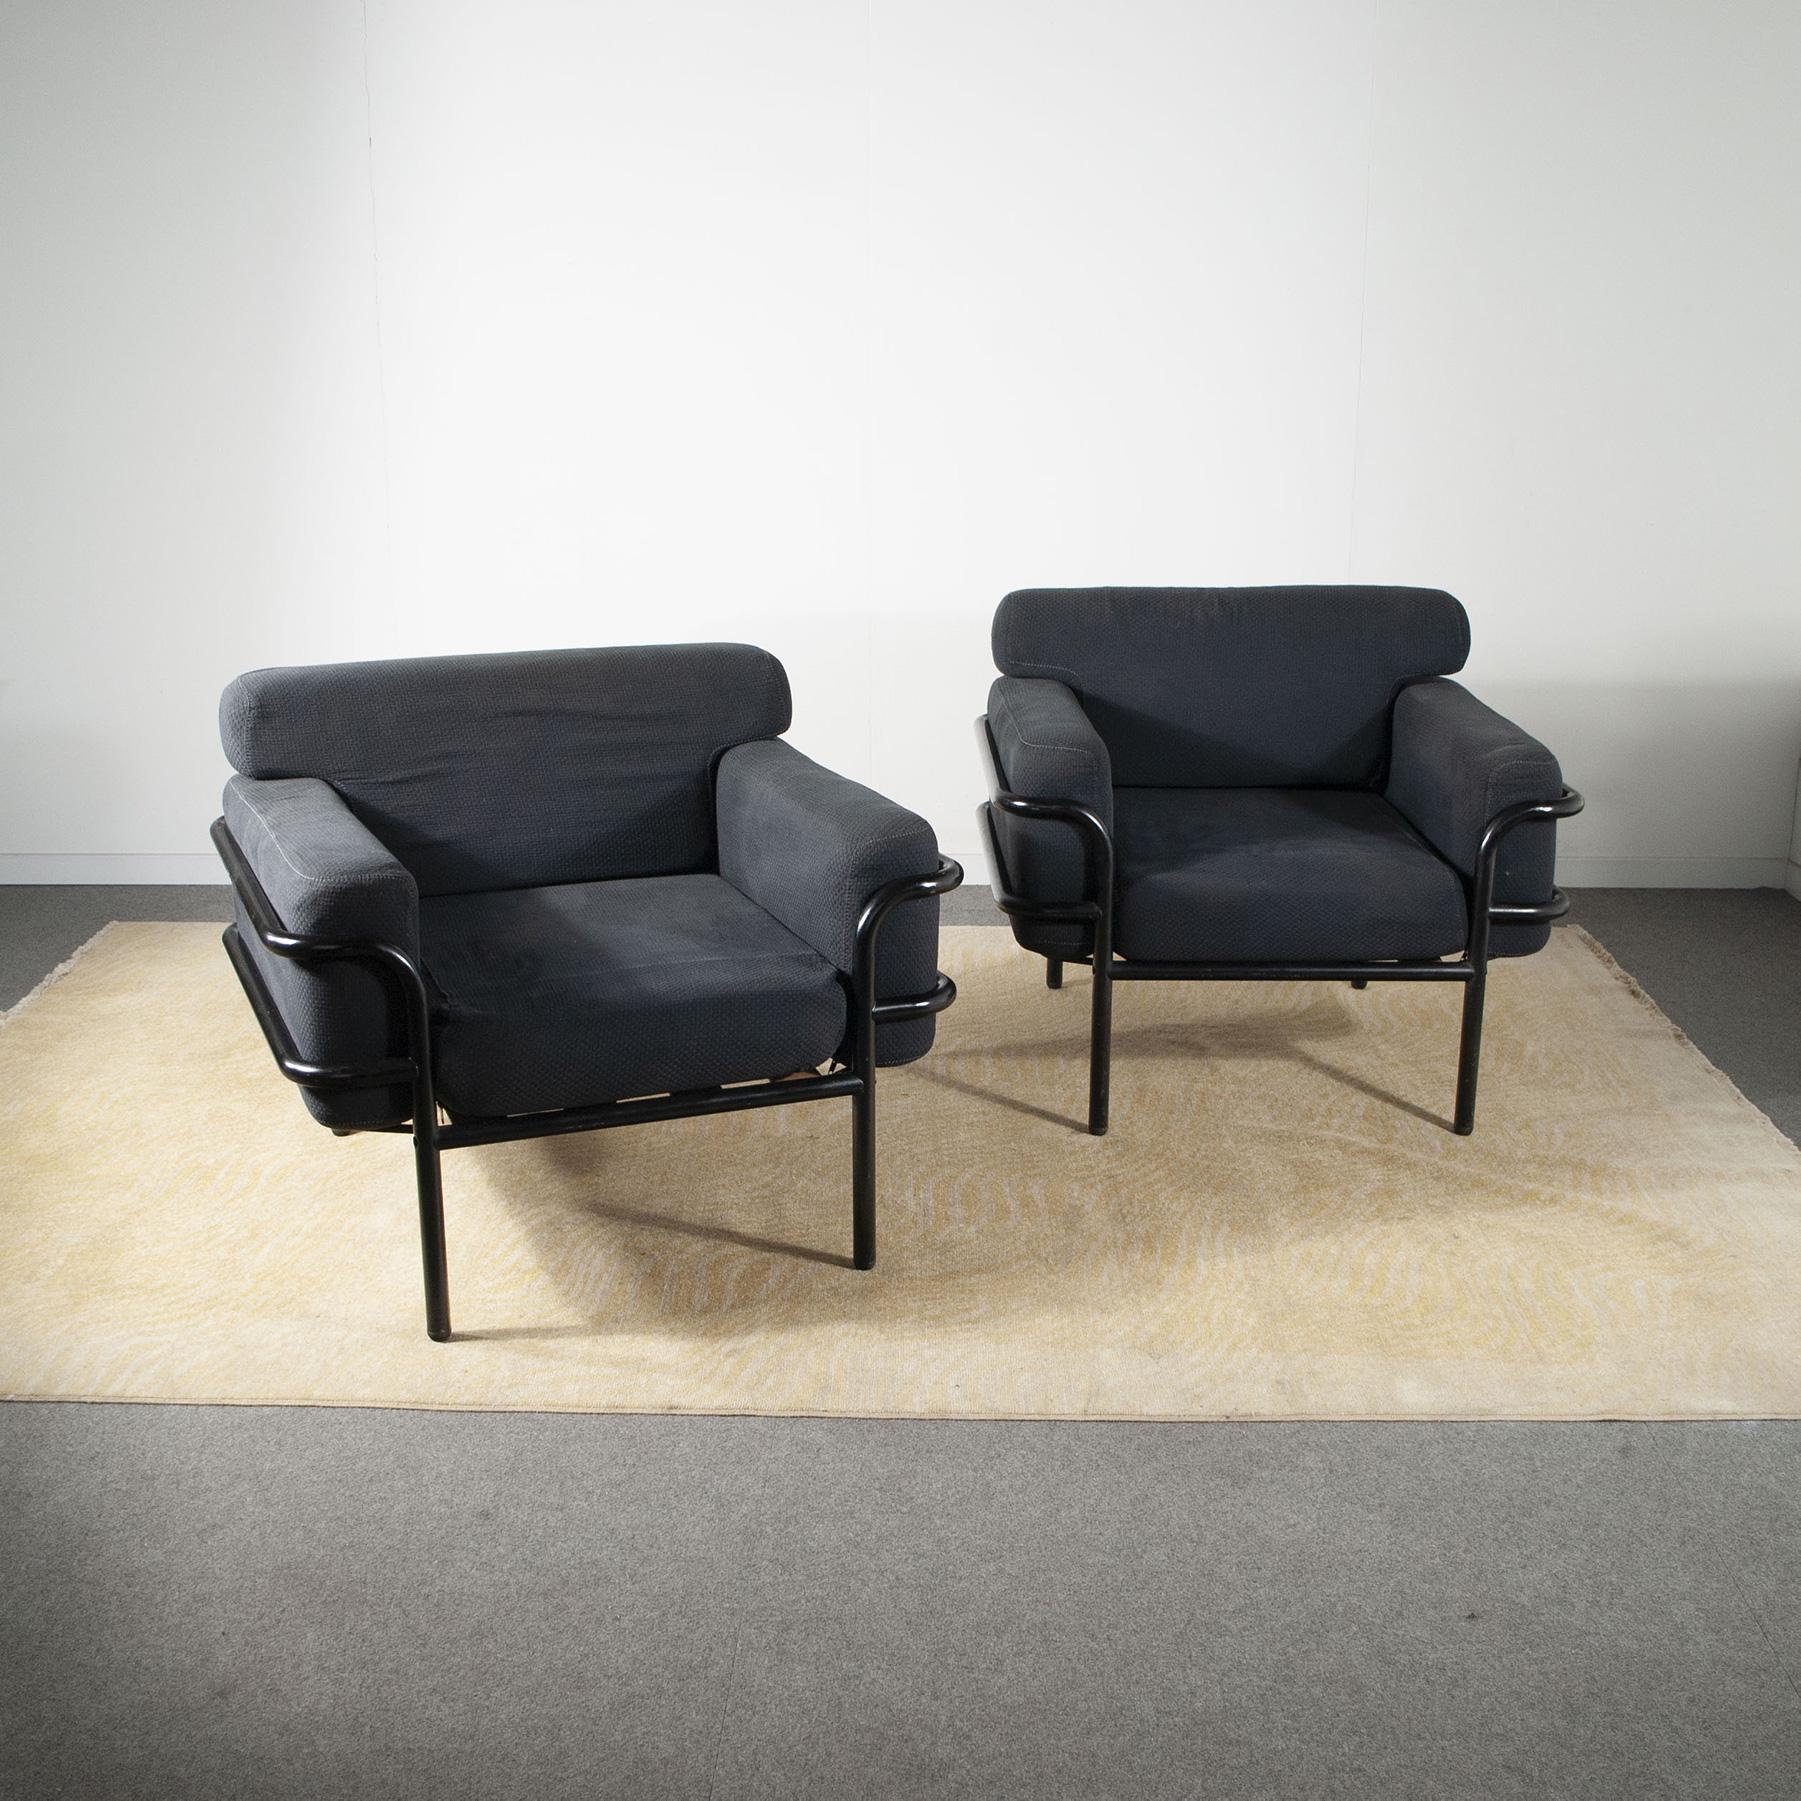 Pair of 1960s armchairs tubular metal frame and fabric seats in Le Corbusier’s LC2 style.